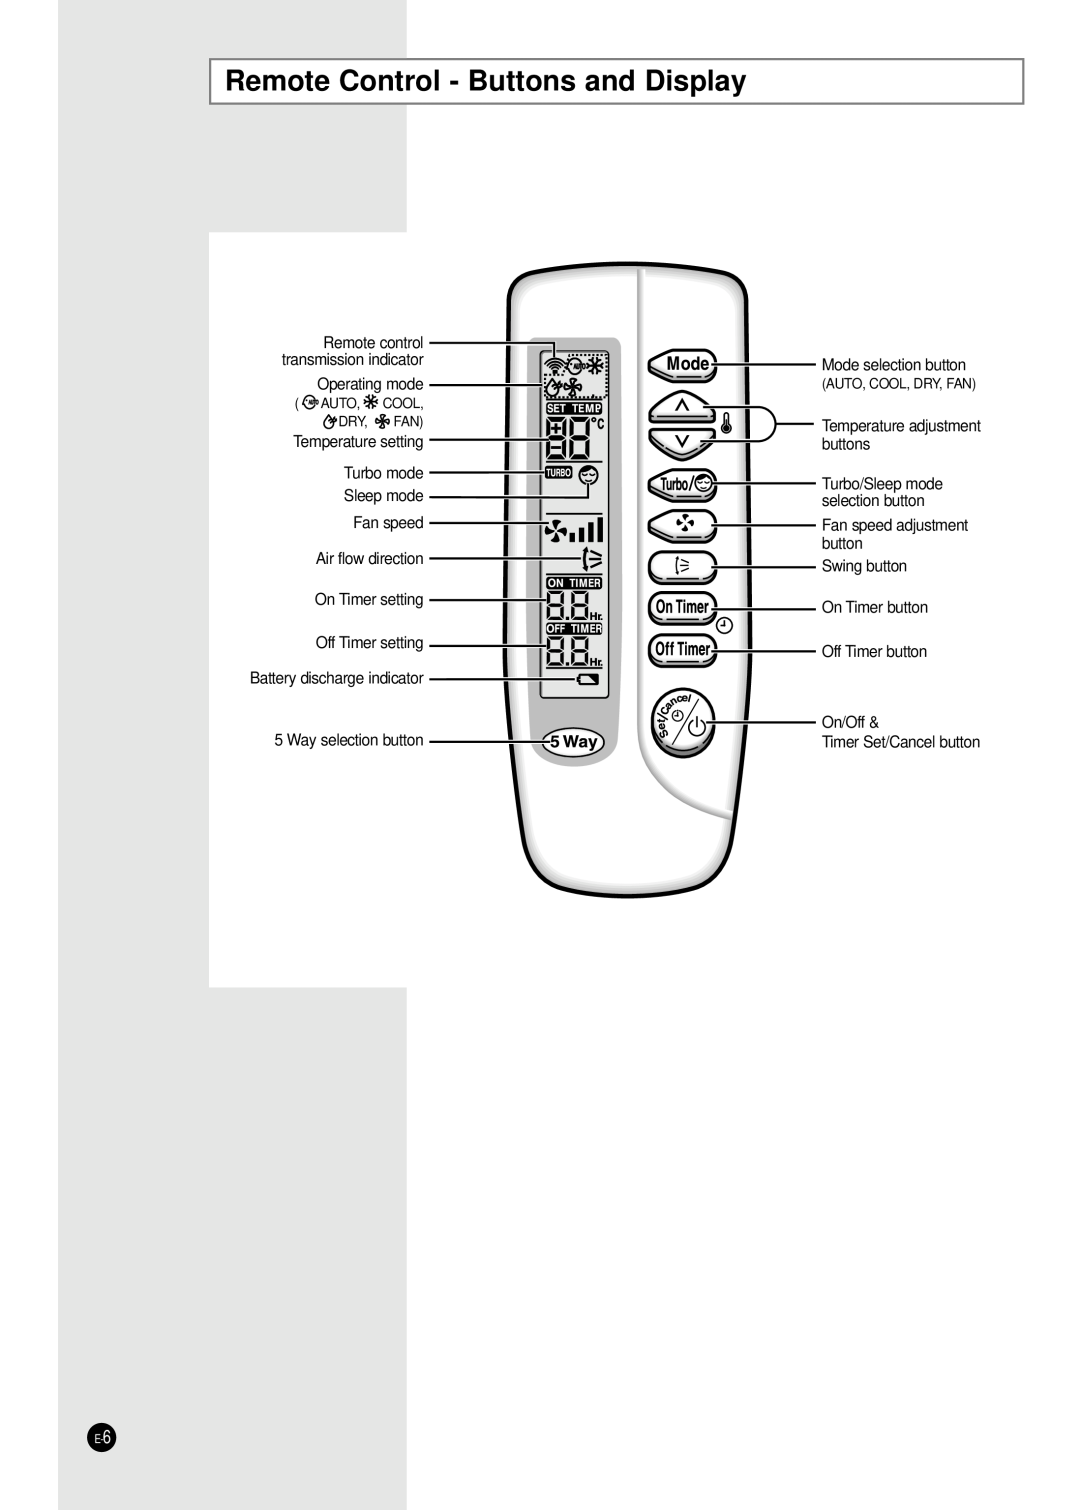 Samsung AS24B1 manuel dutilisation Remote Control - Buttons and Display 